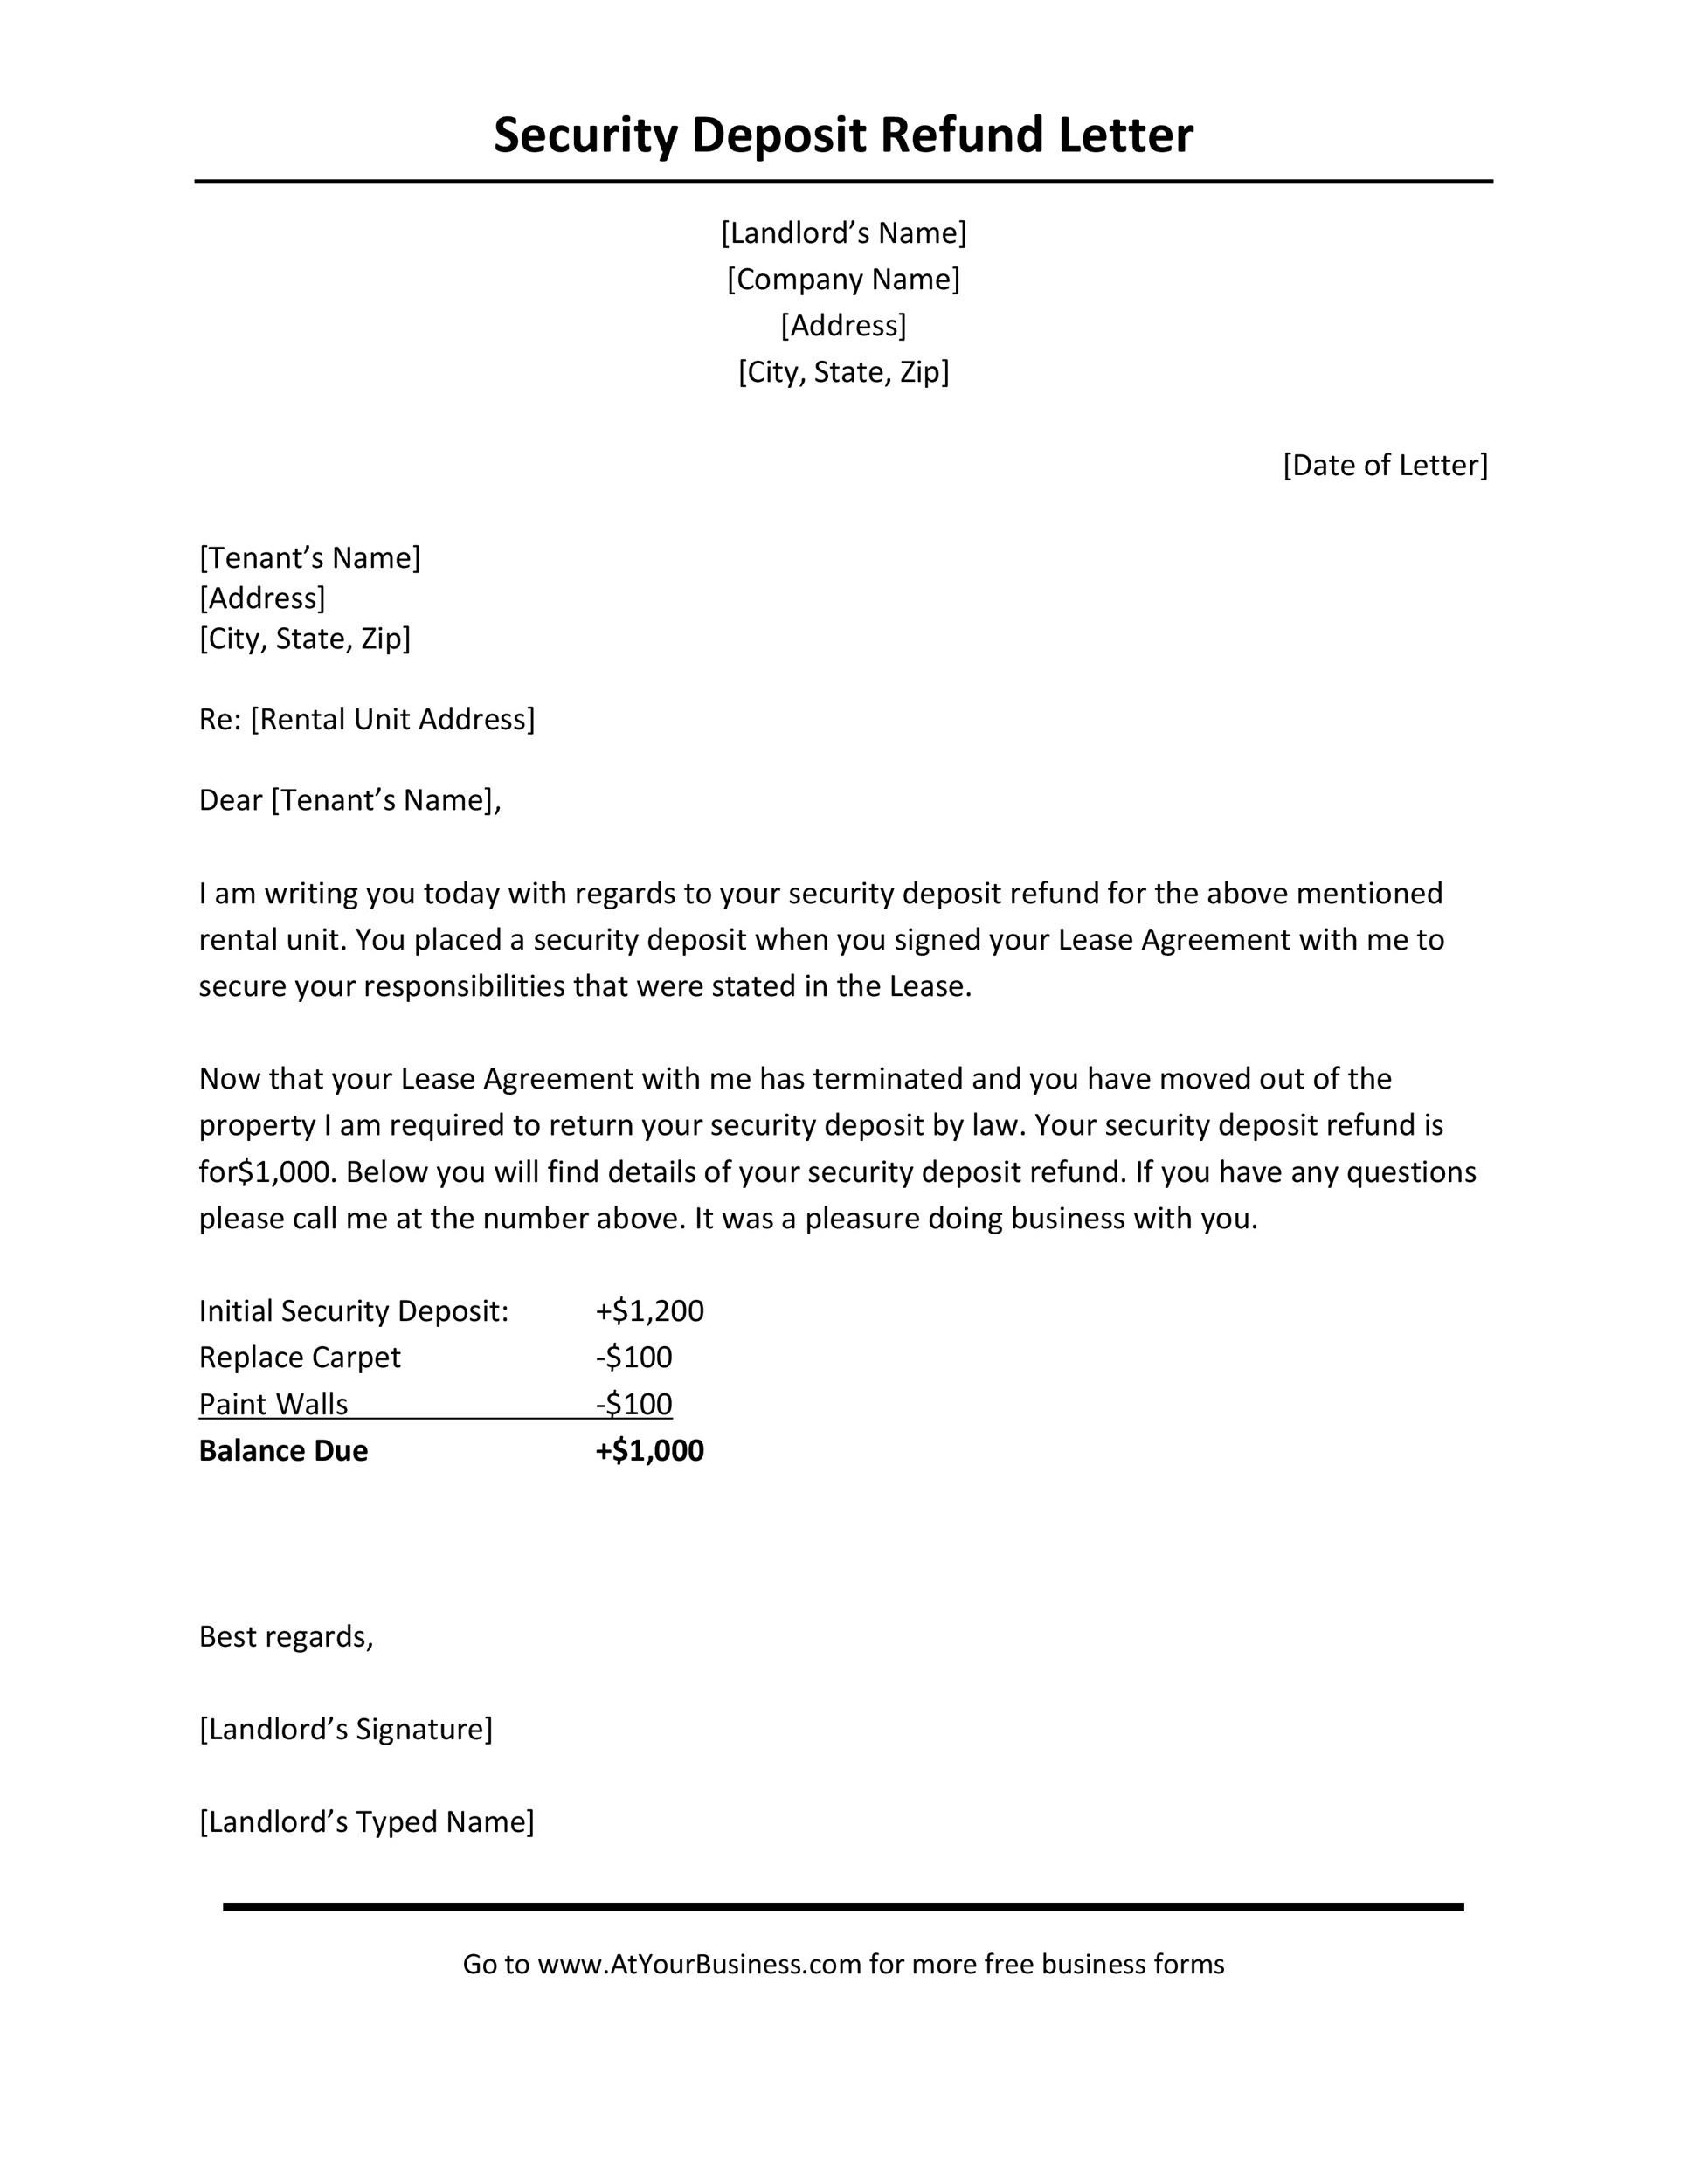 Itemized Security Deposit Deduction Letter from templatelab.com